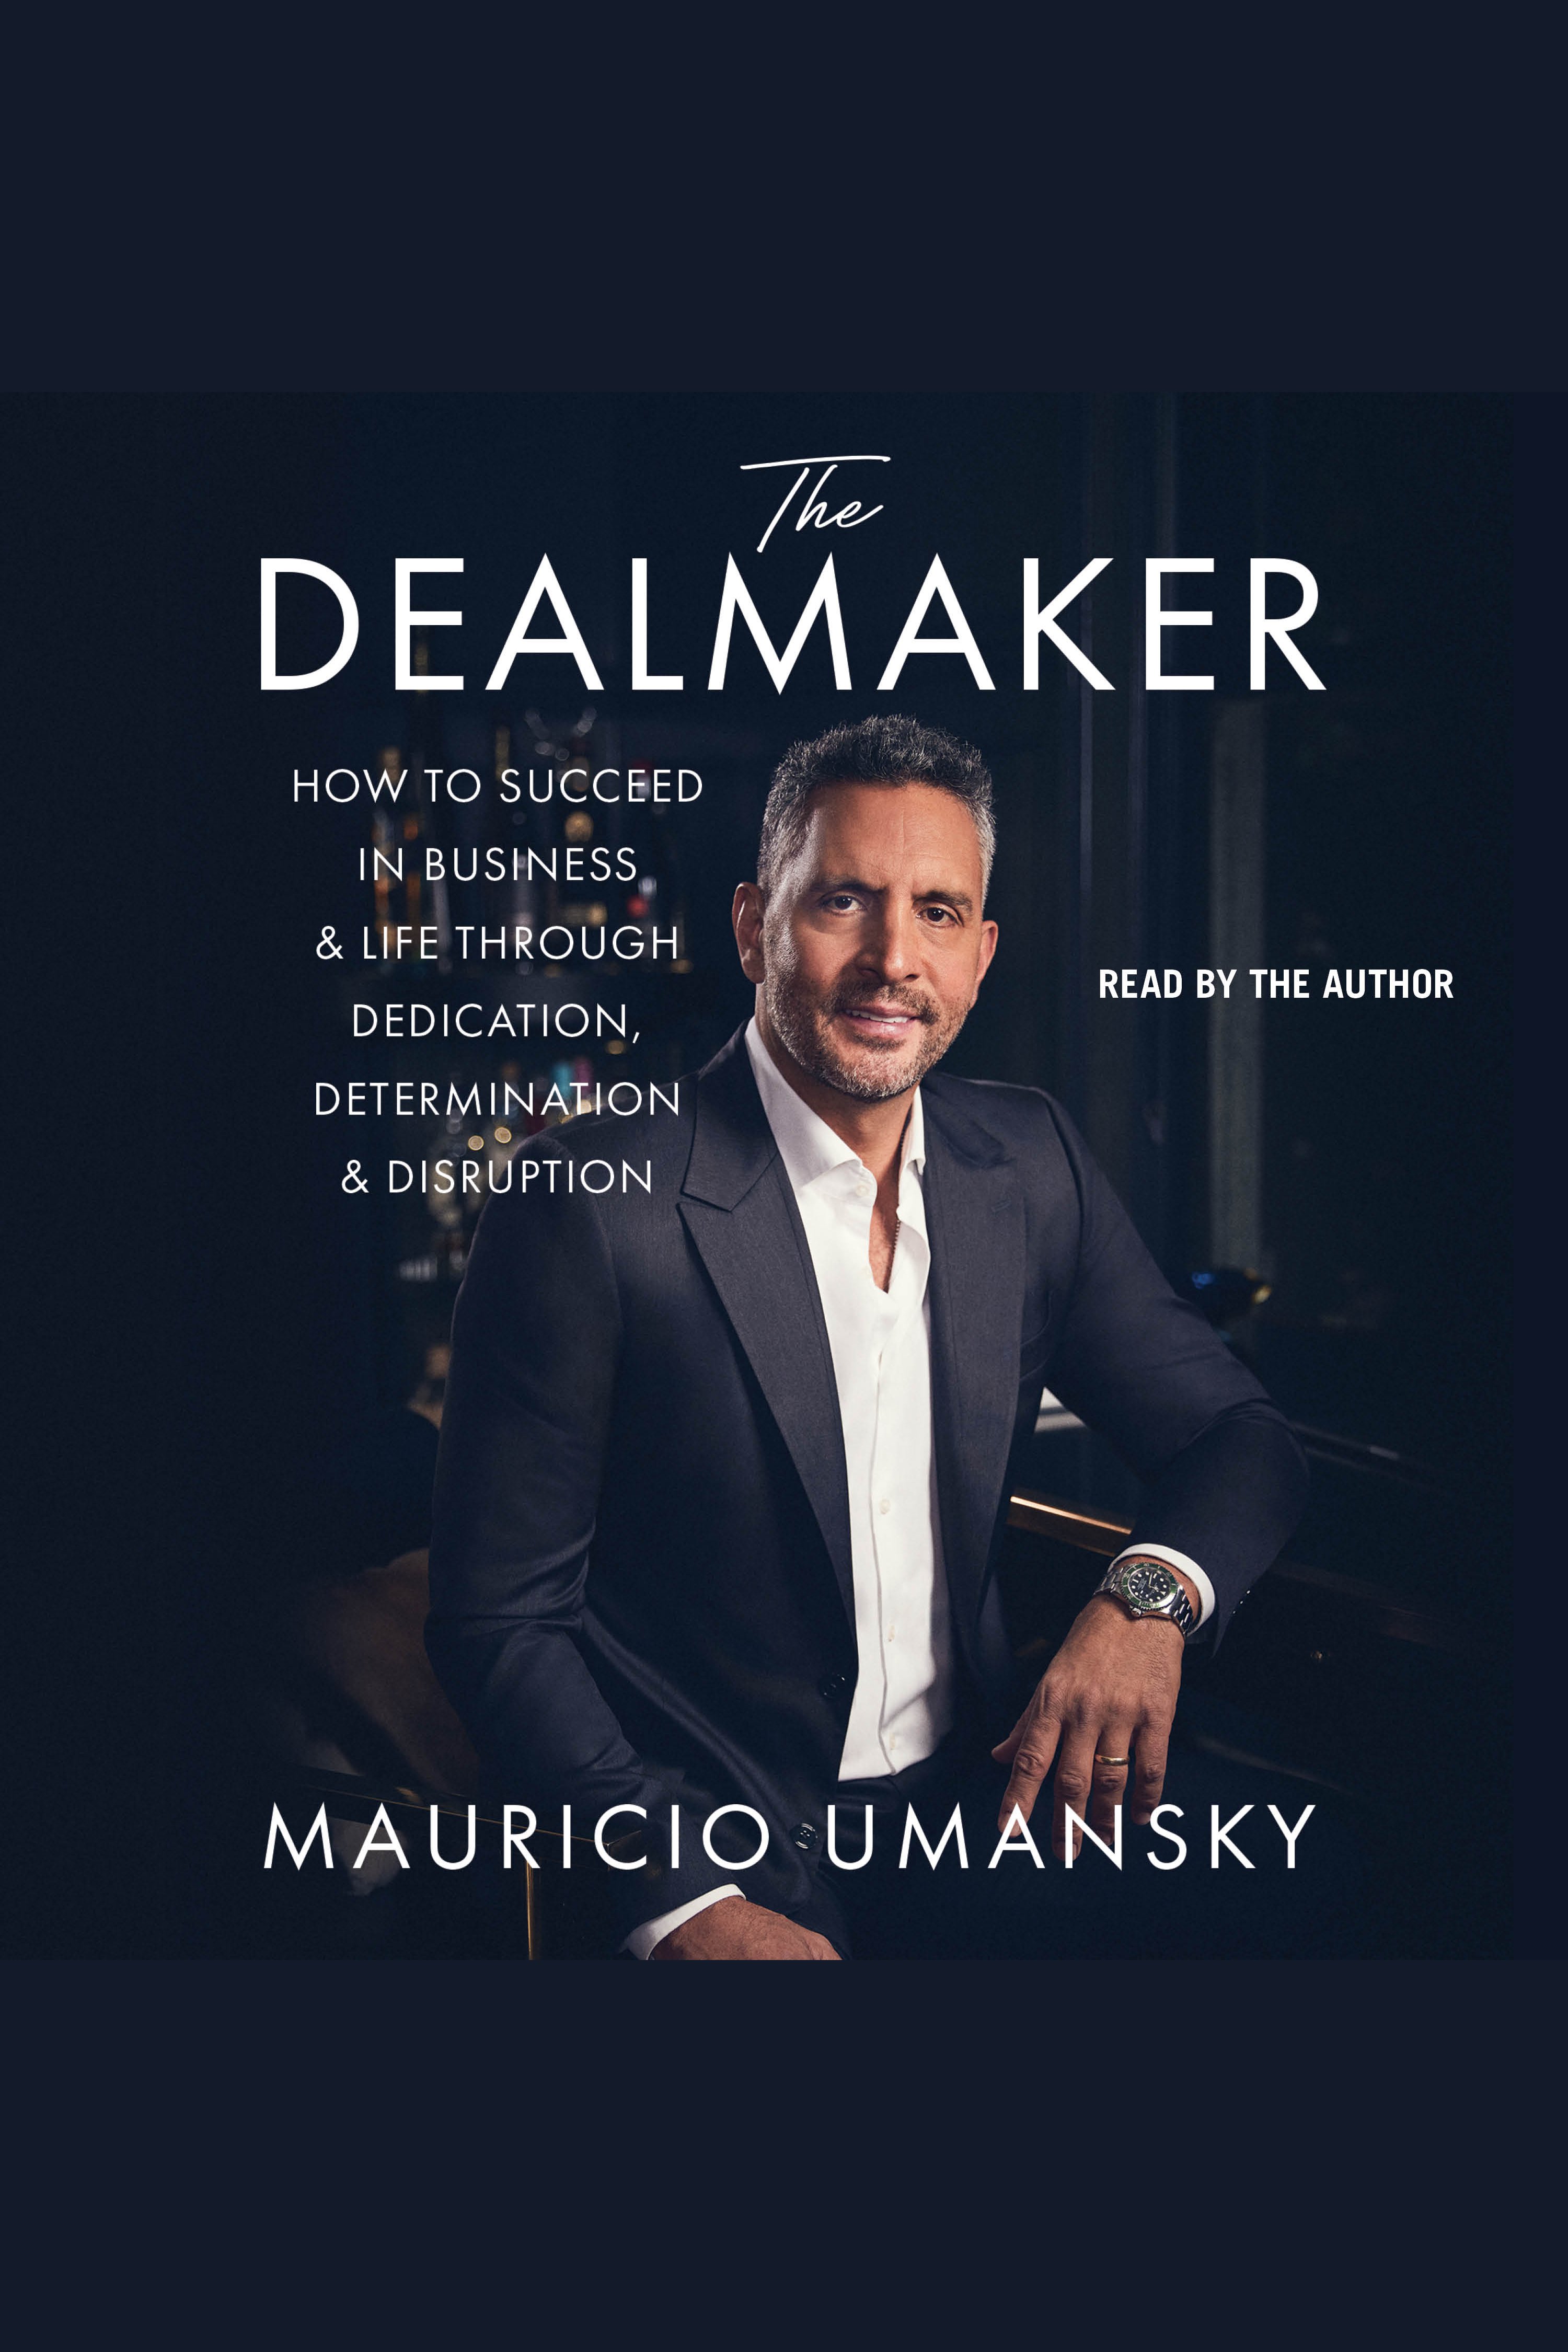 The Dealmaker How to Succeed in Business & Life Through Dedication, Determination & Disruption cover image